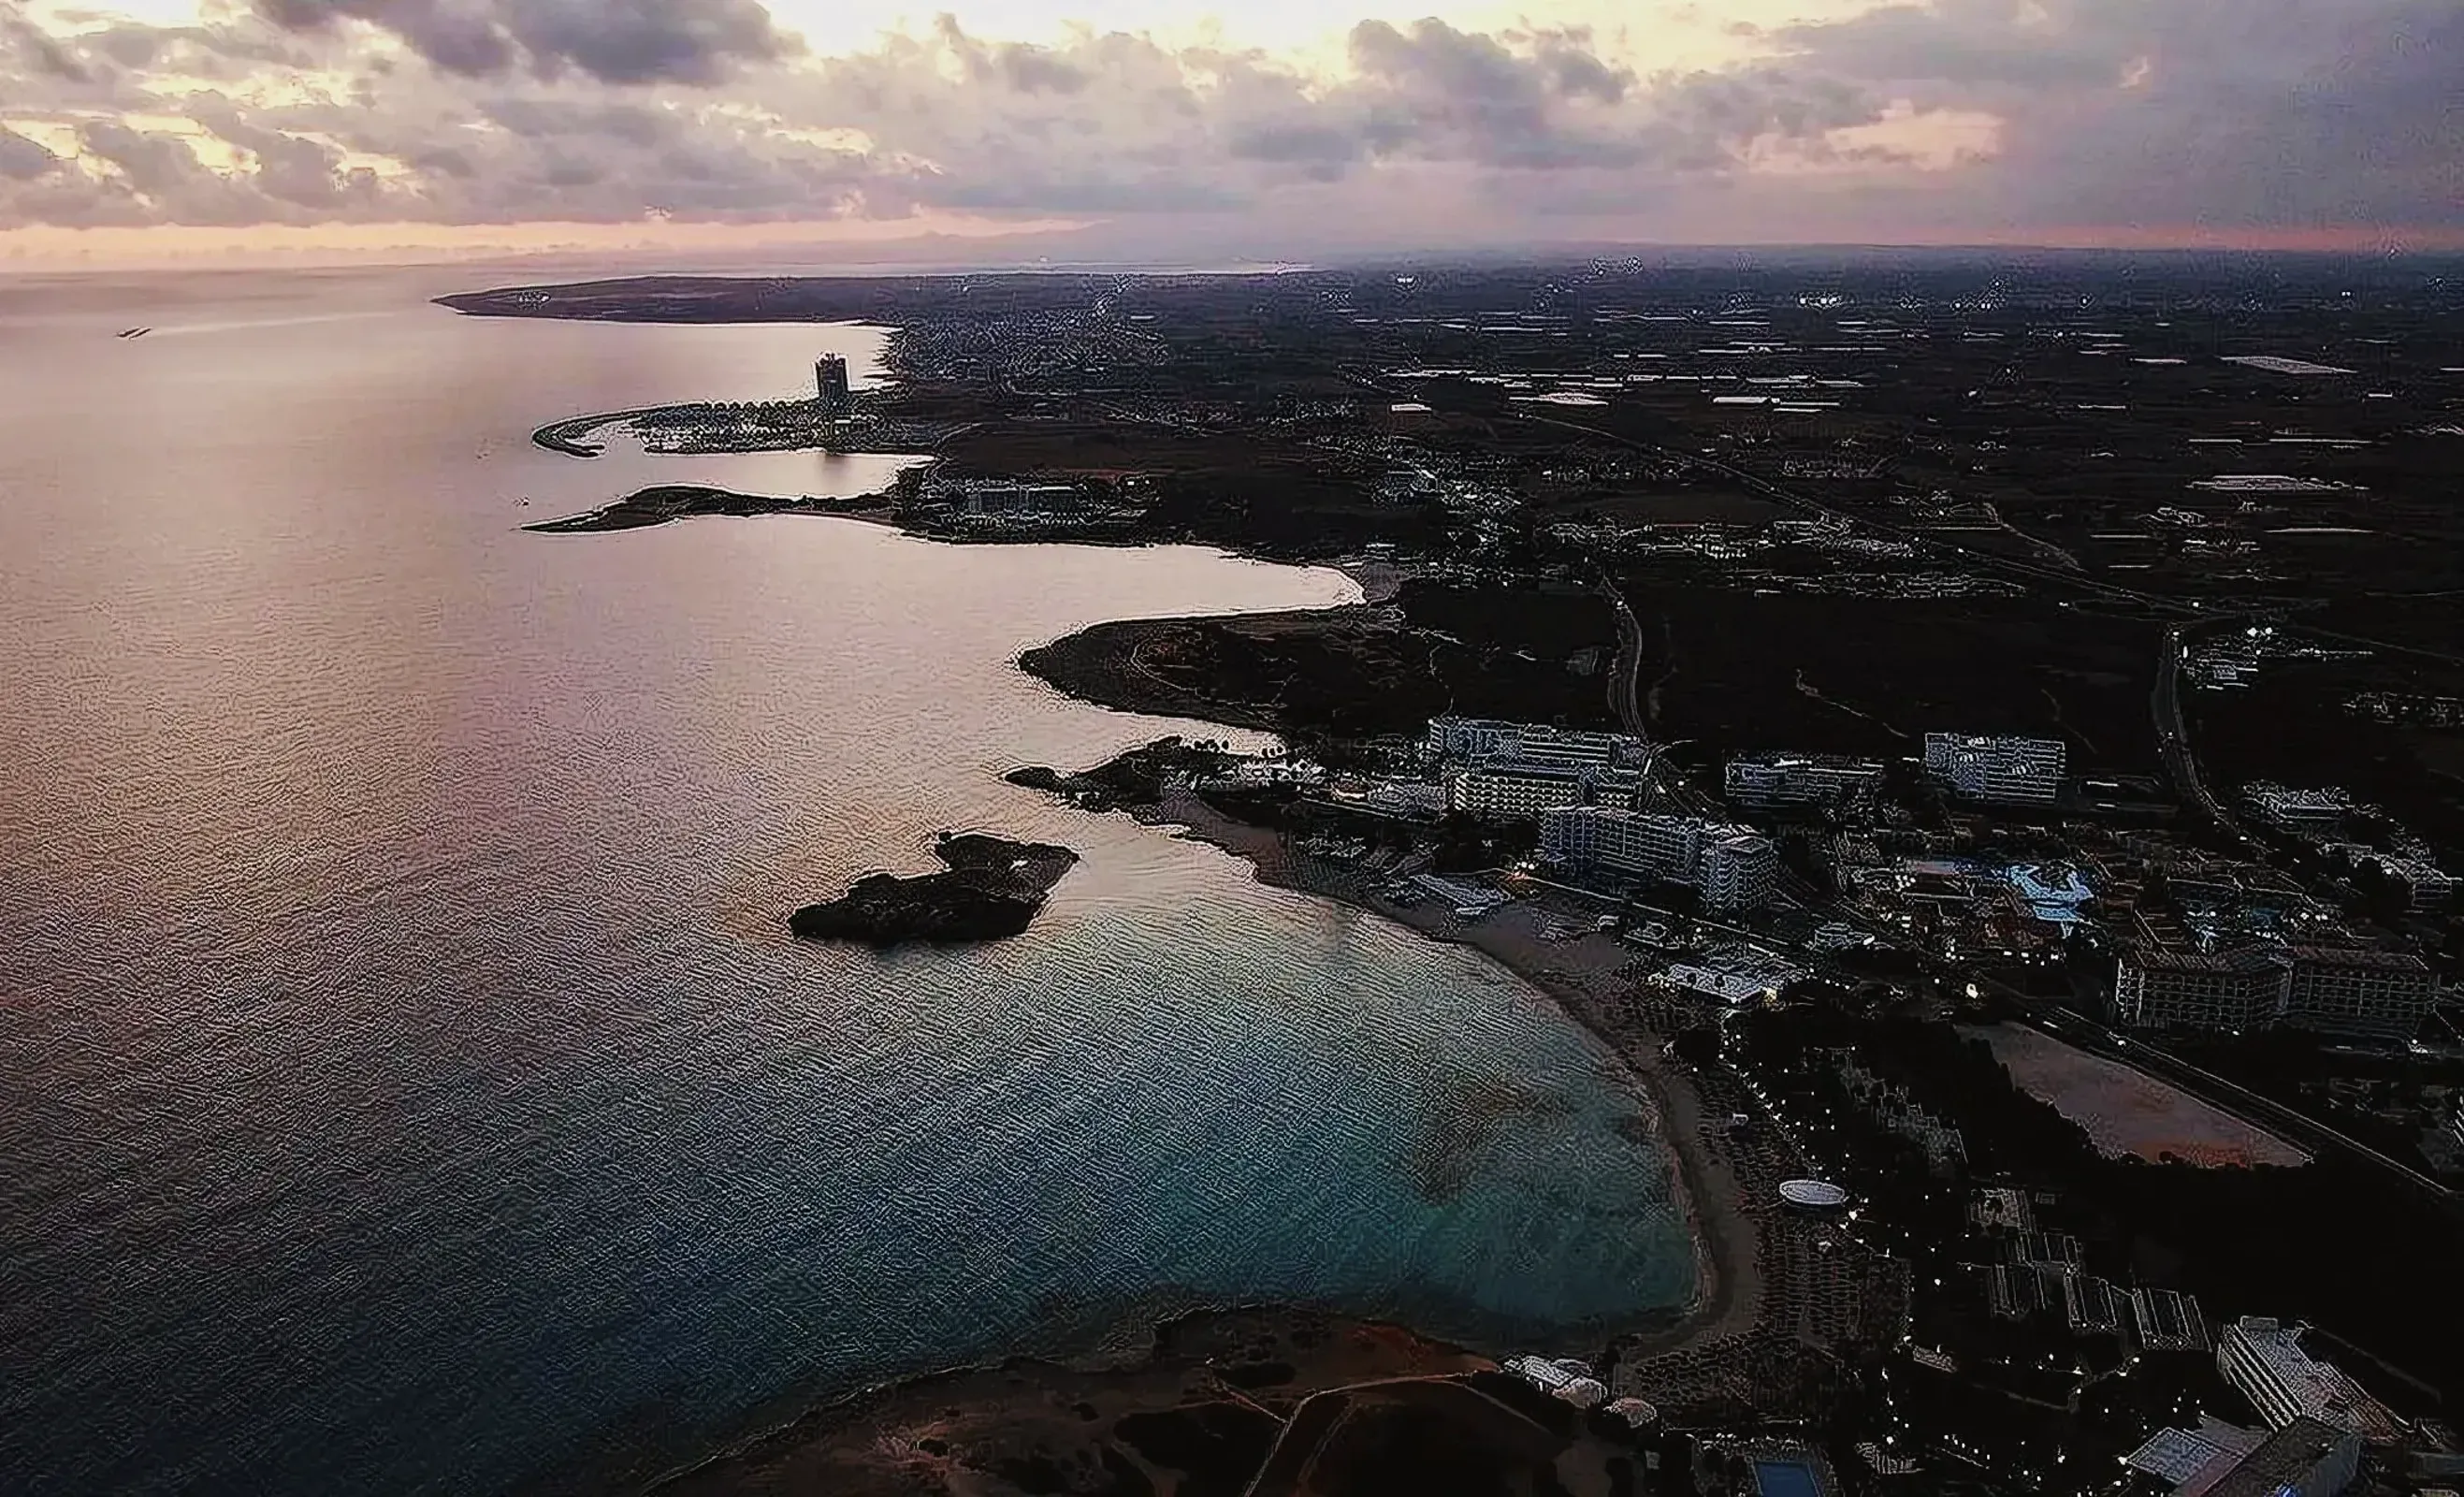 Aerial view of Nissi Beach in Ayia Napa, Cyprus with buildings along the shoreline.